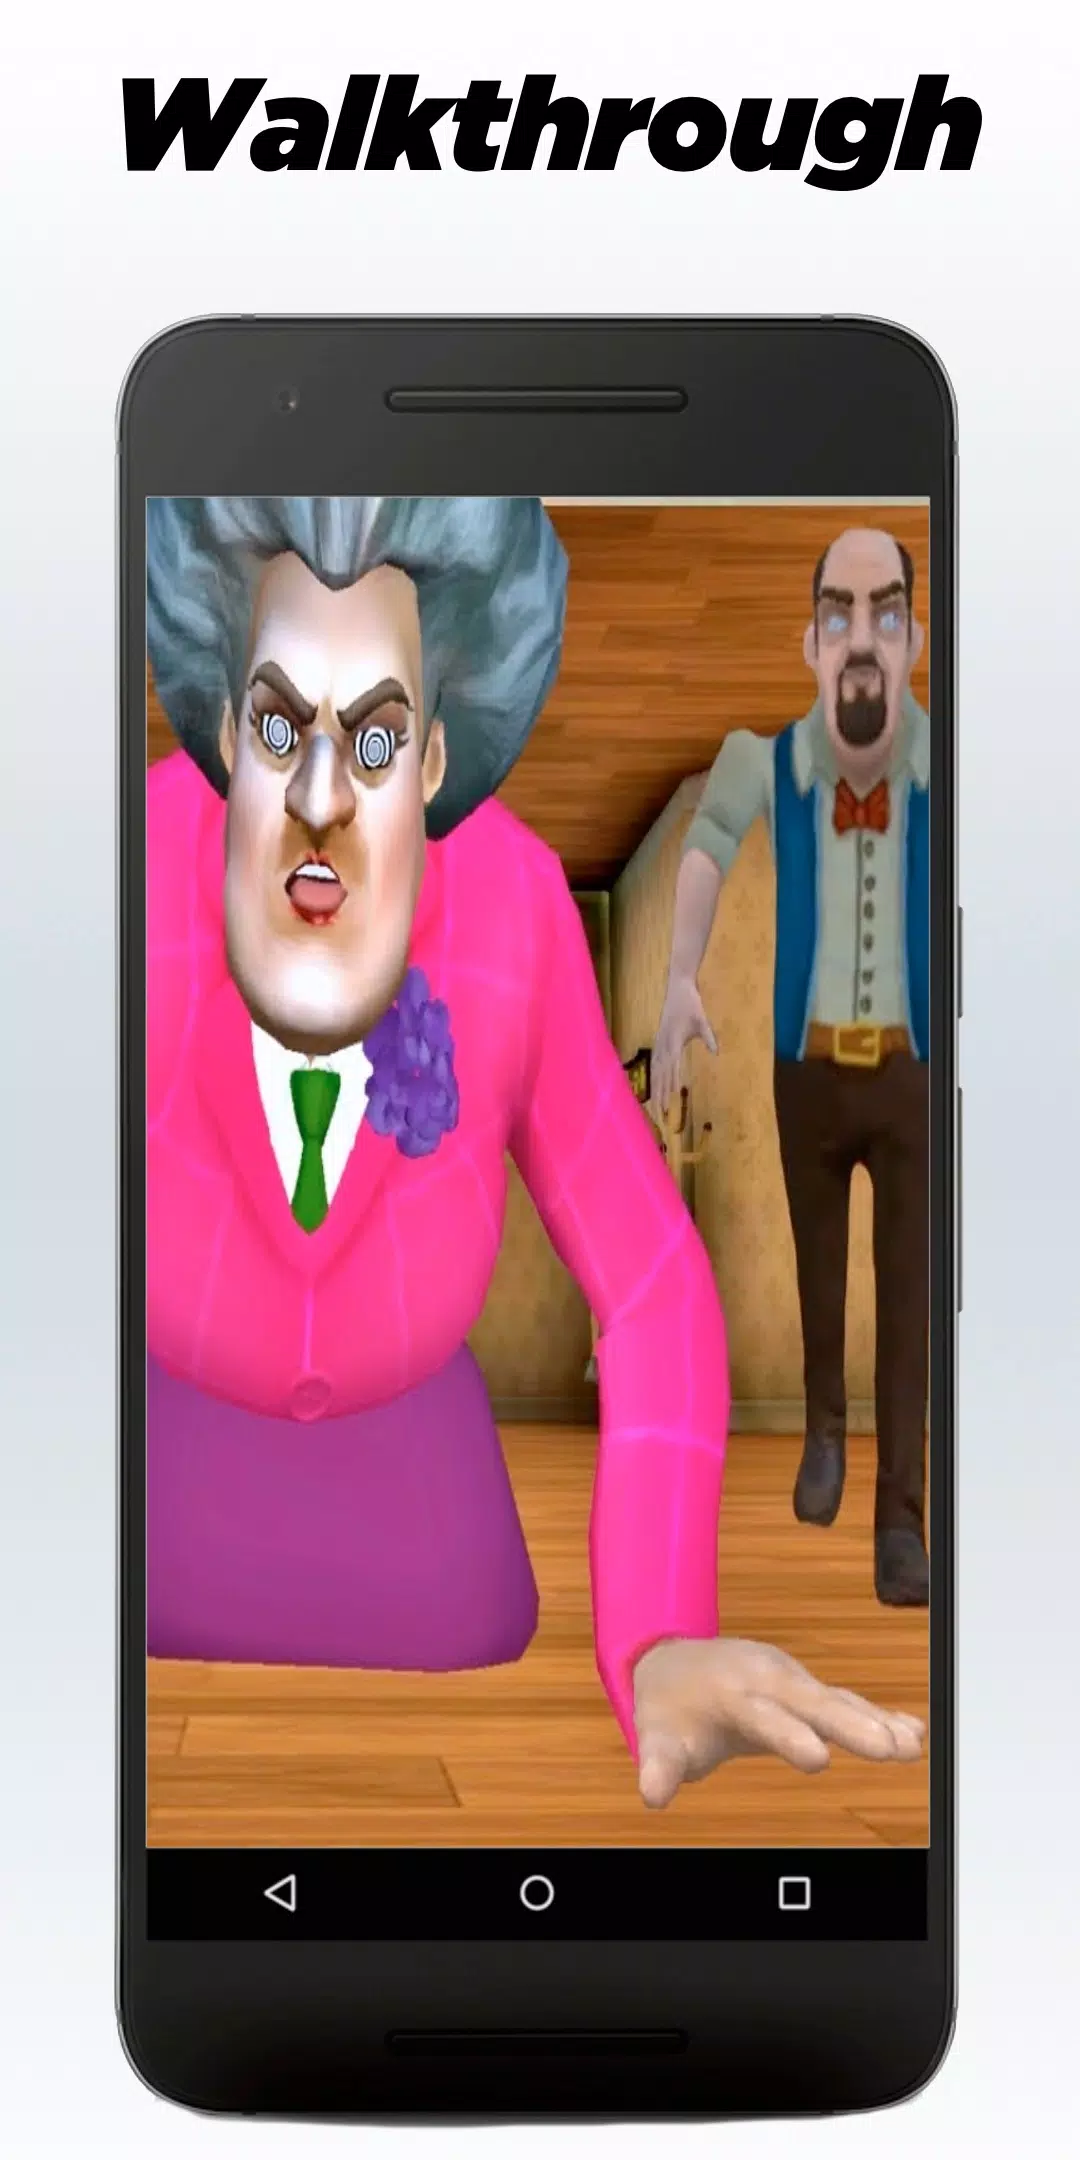 Scary Teacher 3D - OLD VERSION - Miss T Get Pranked - Android & iOS Game 